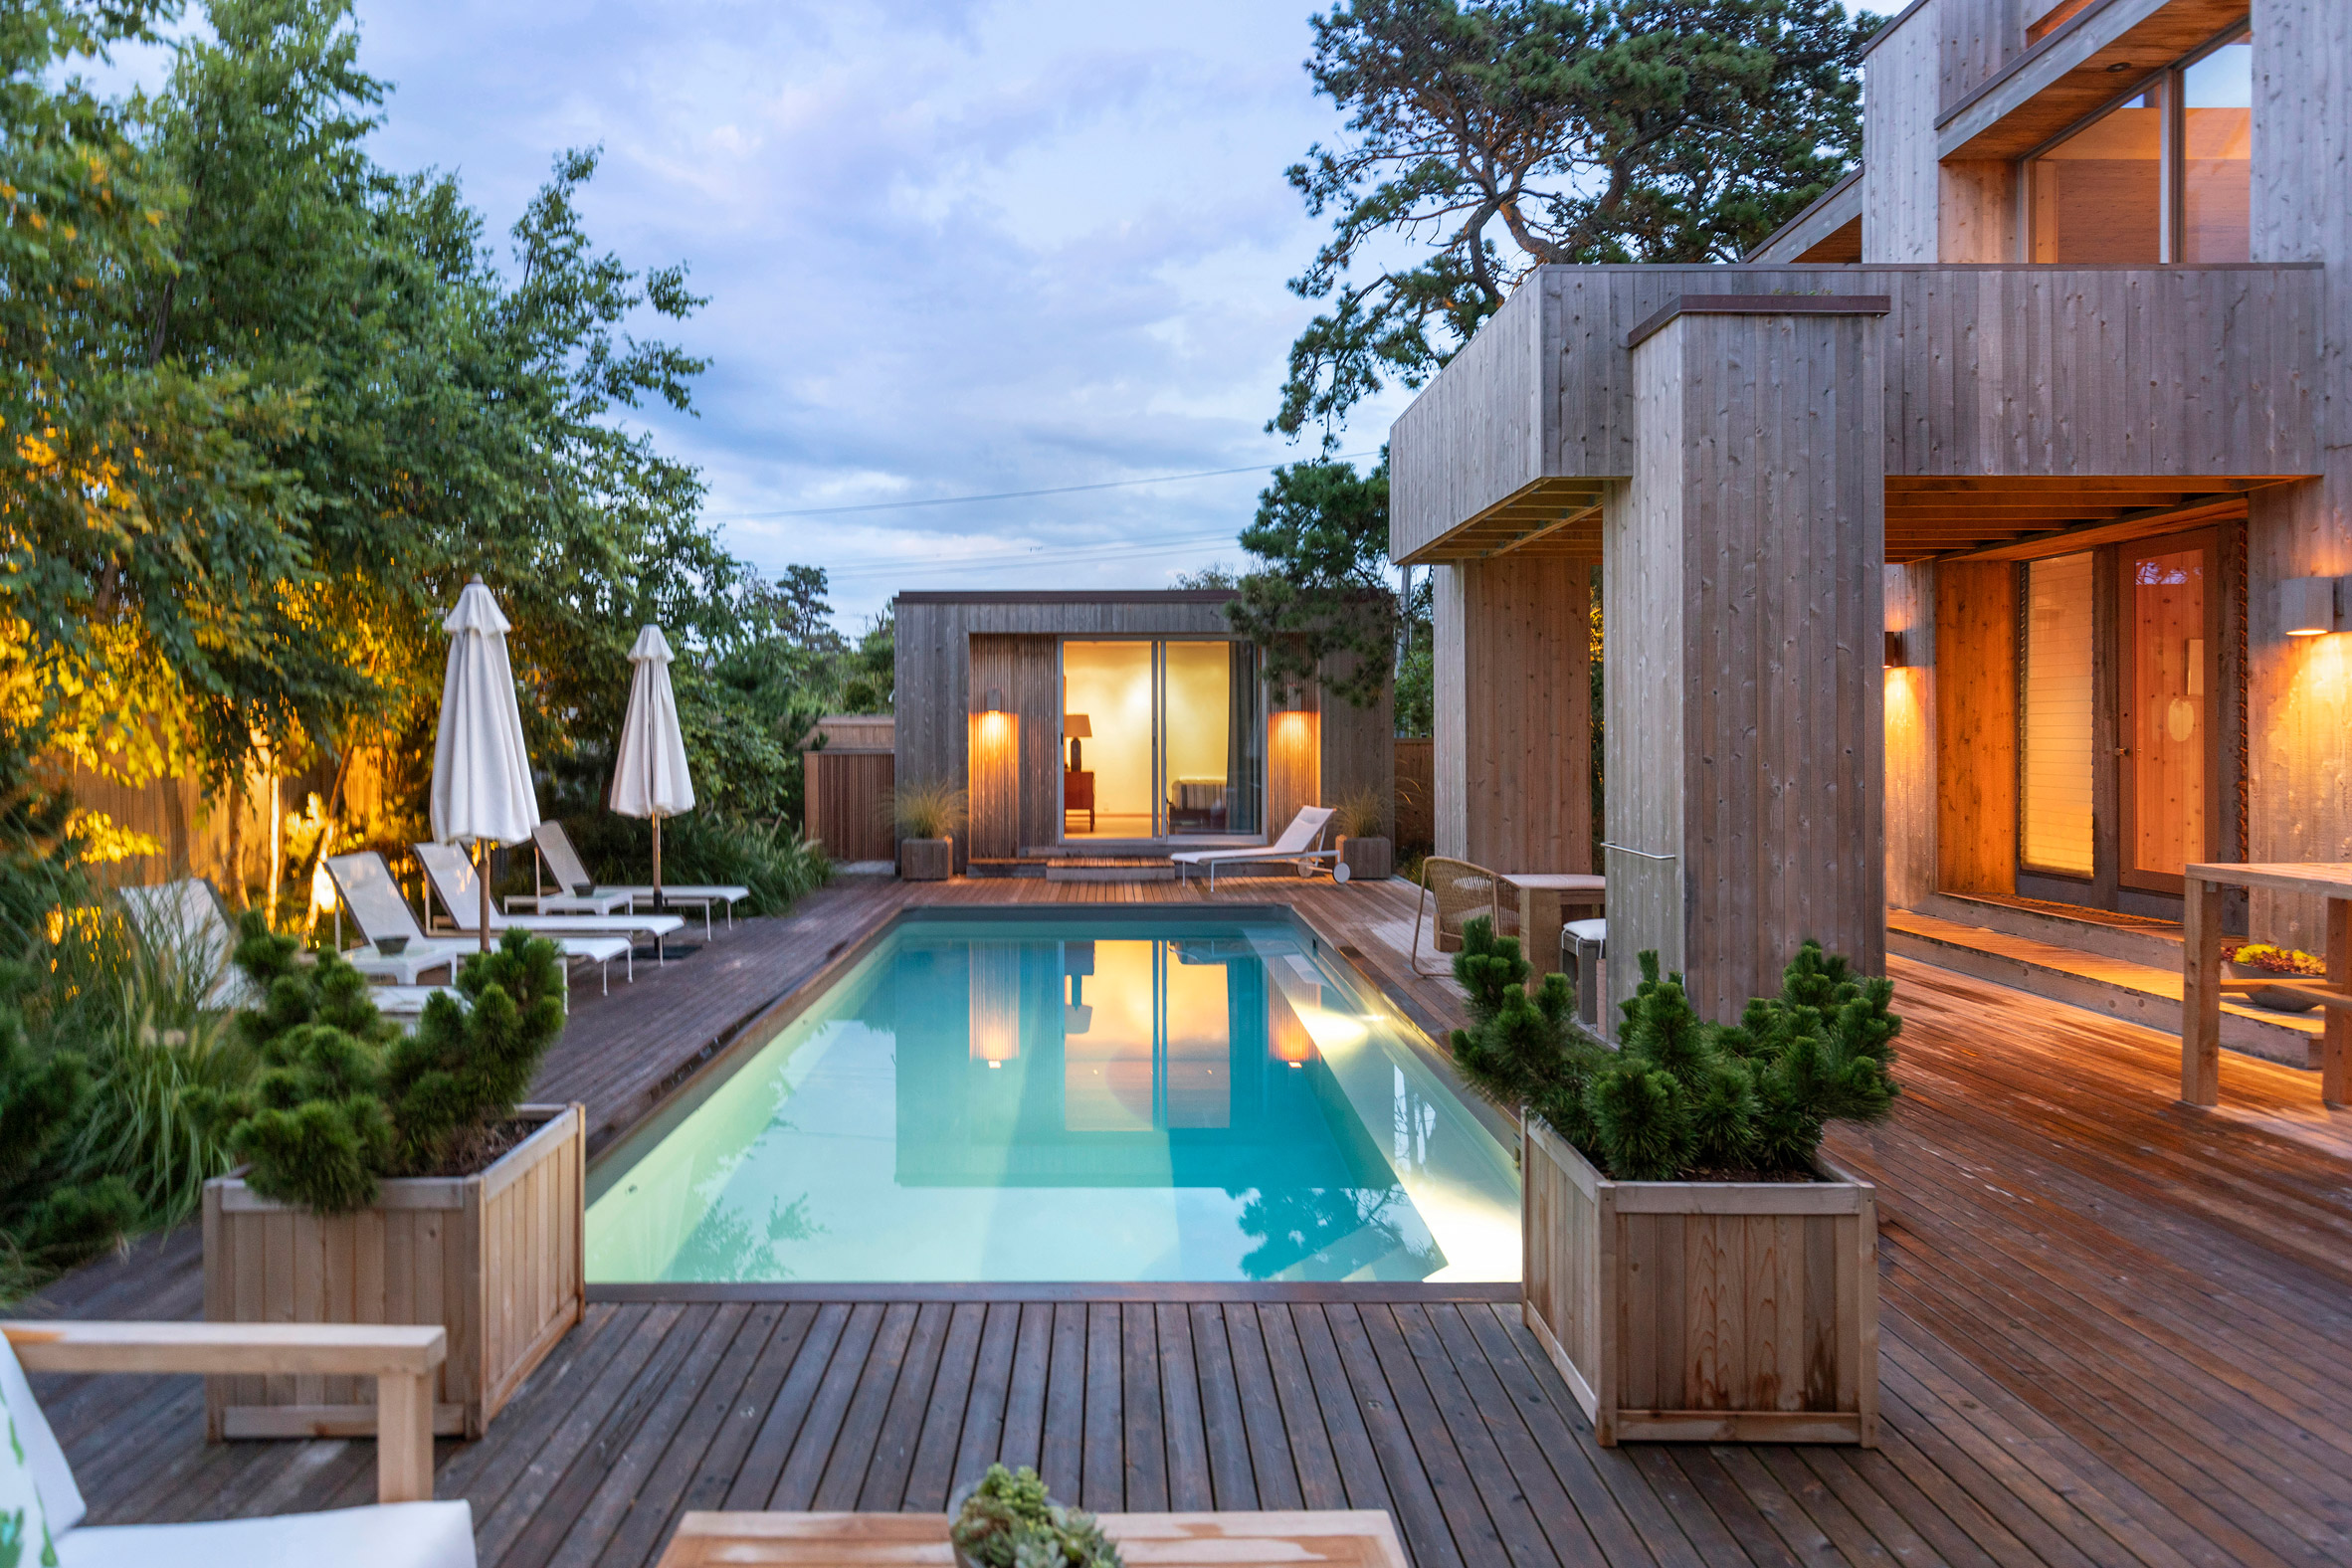 New swimming pool added to 1960s house on Fire Island